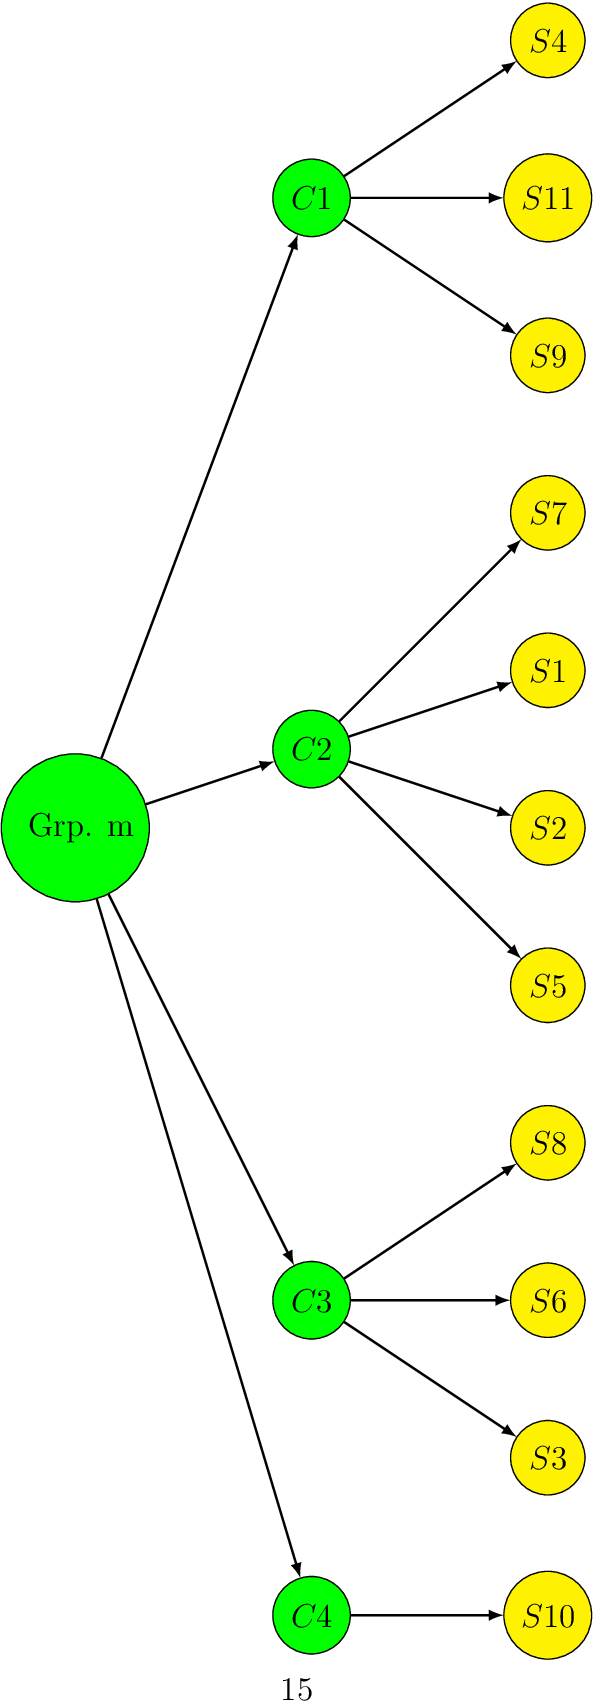 Figure 4 for Non-parametric Clustering of Multivariate Populations with Arbitrary Sizes